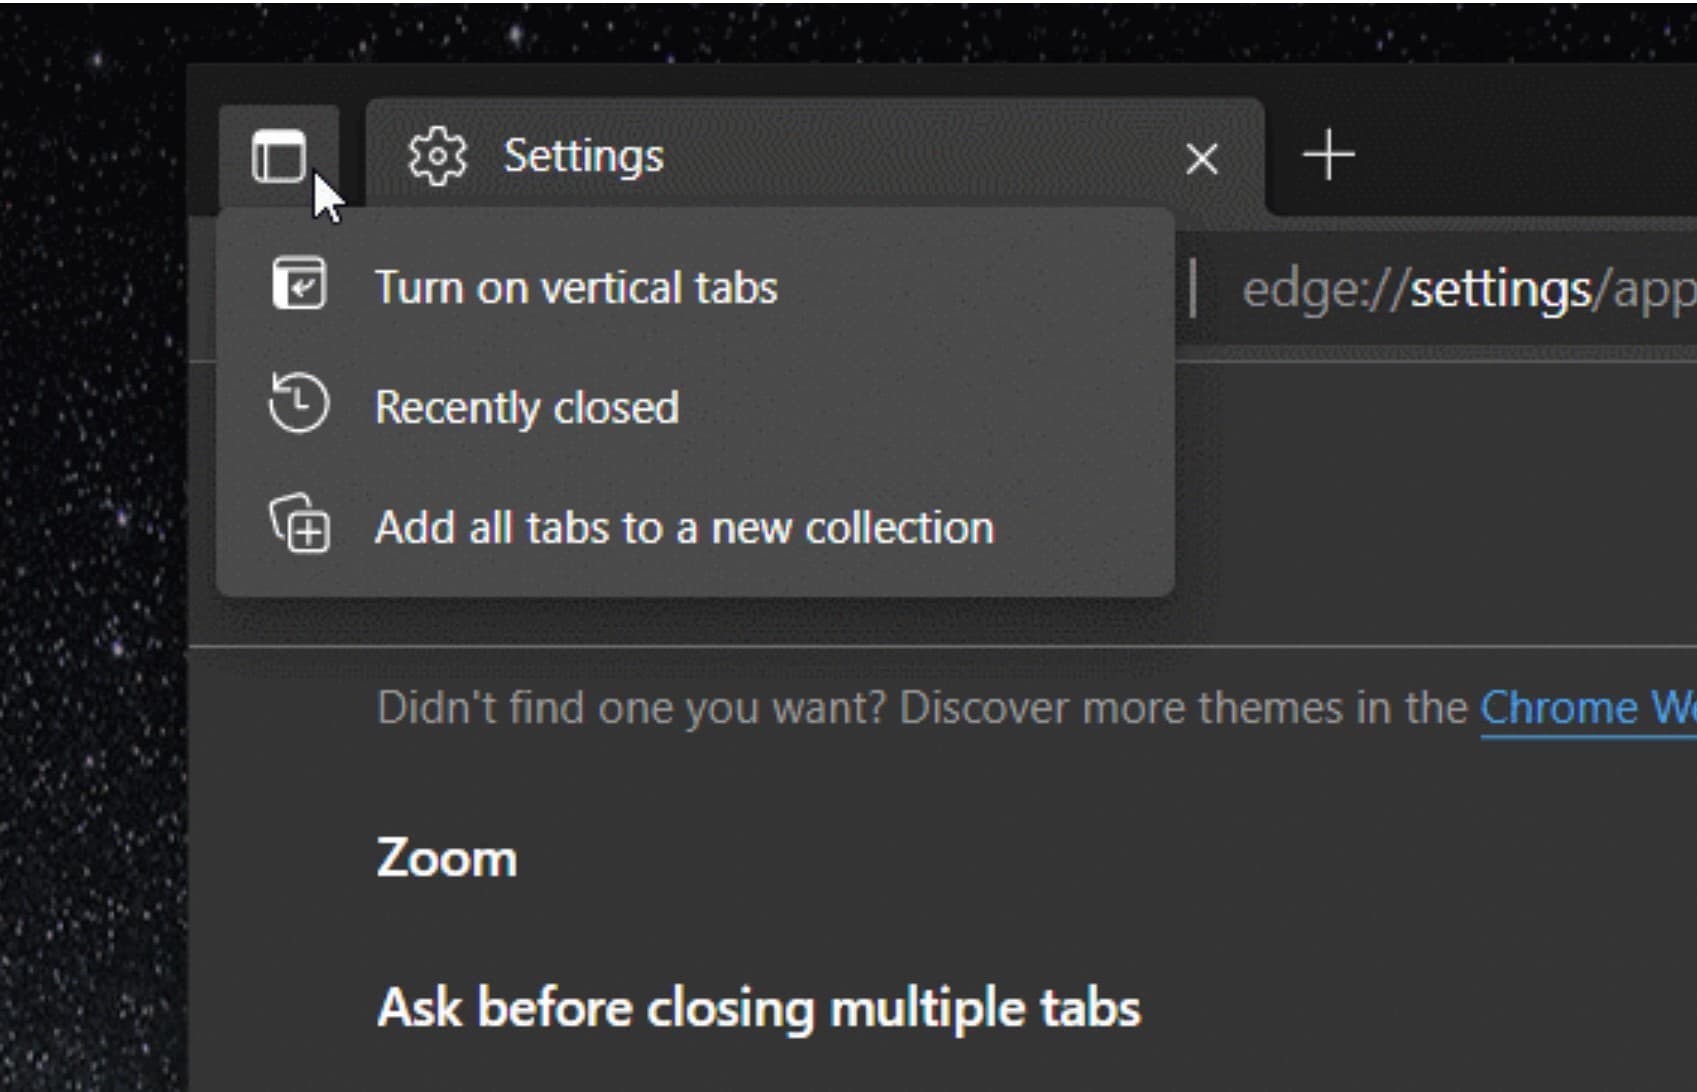 Microsoft is testing a new Tab Action Menu in Edge Canary